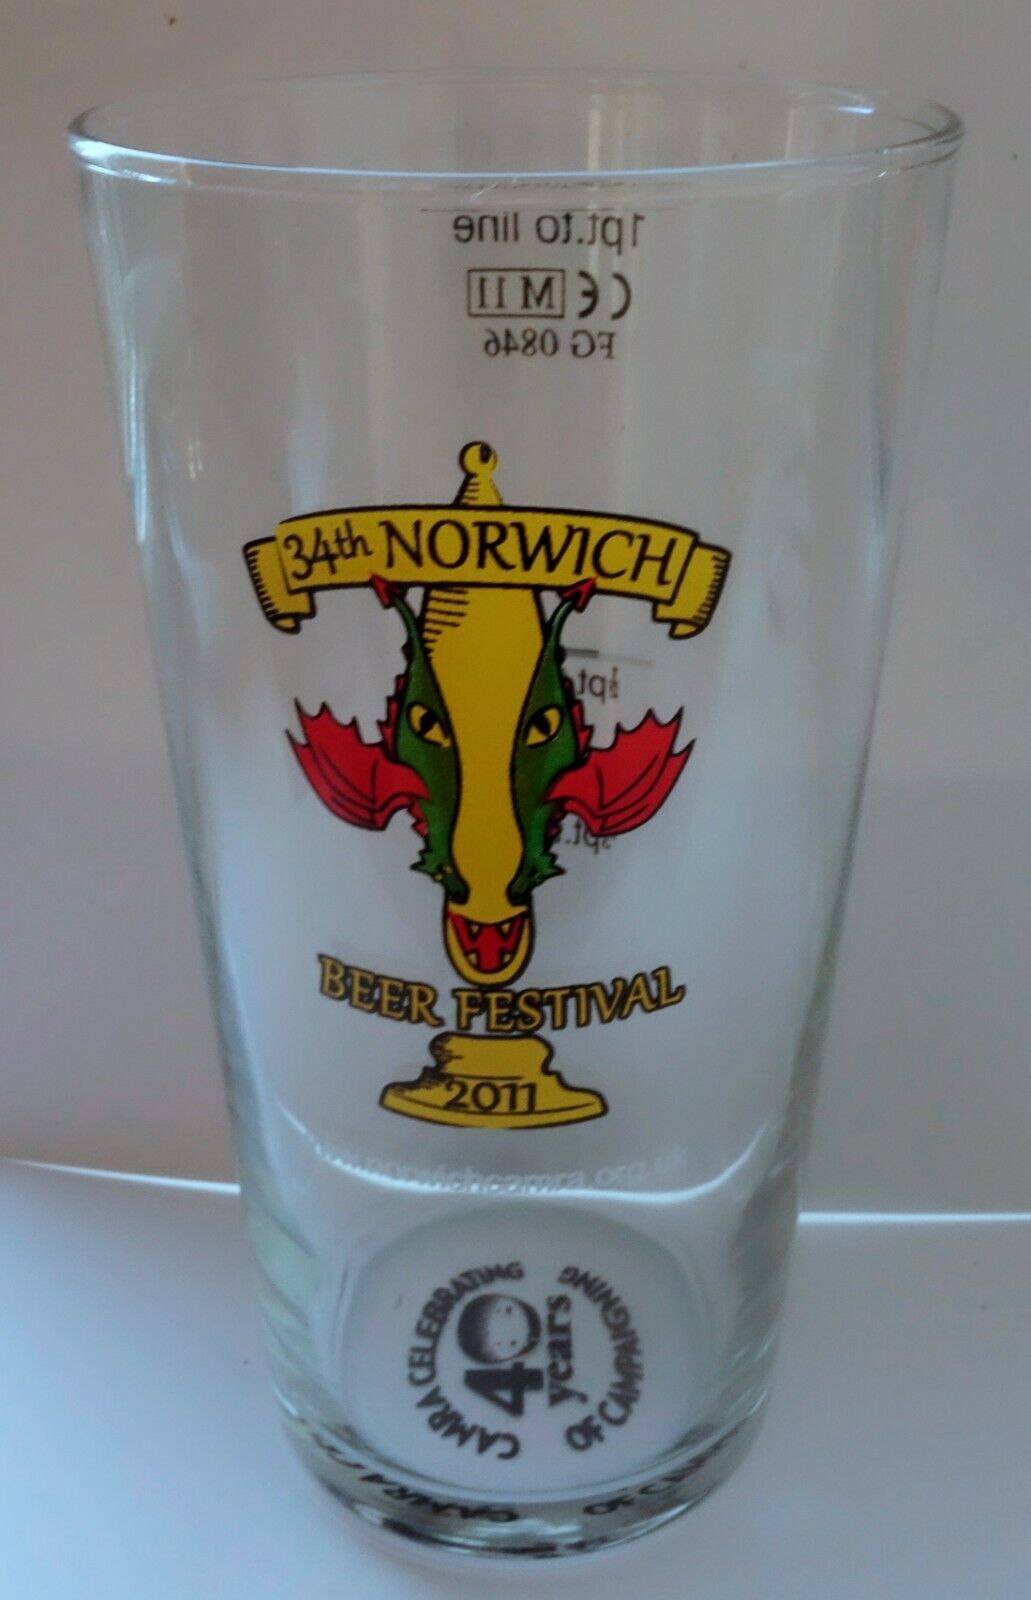  34TH NORWICH BEER FESTIVAL 1 PINT GLASS 2011